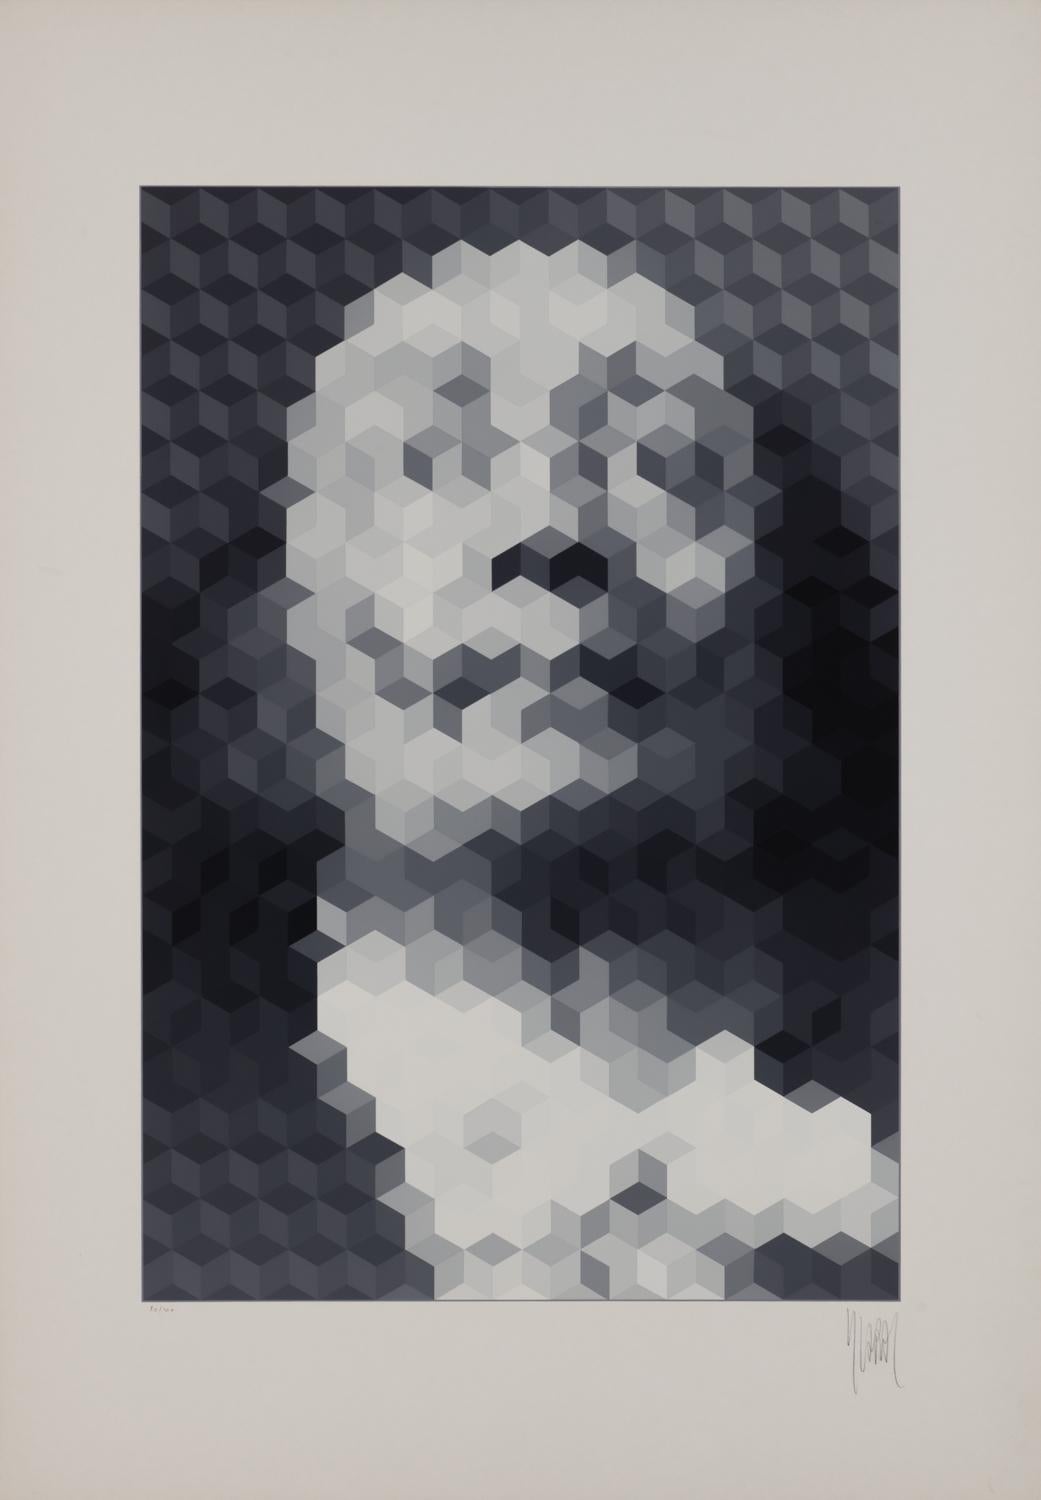 Faces of Dali #2 - Print by Yvaral (Jean-Pierre Vasarely)